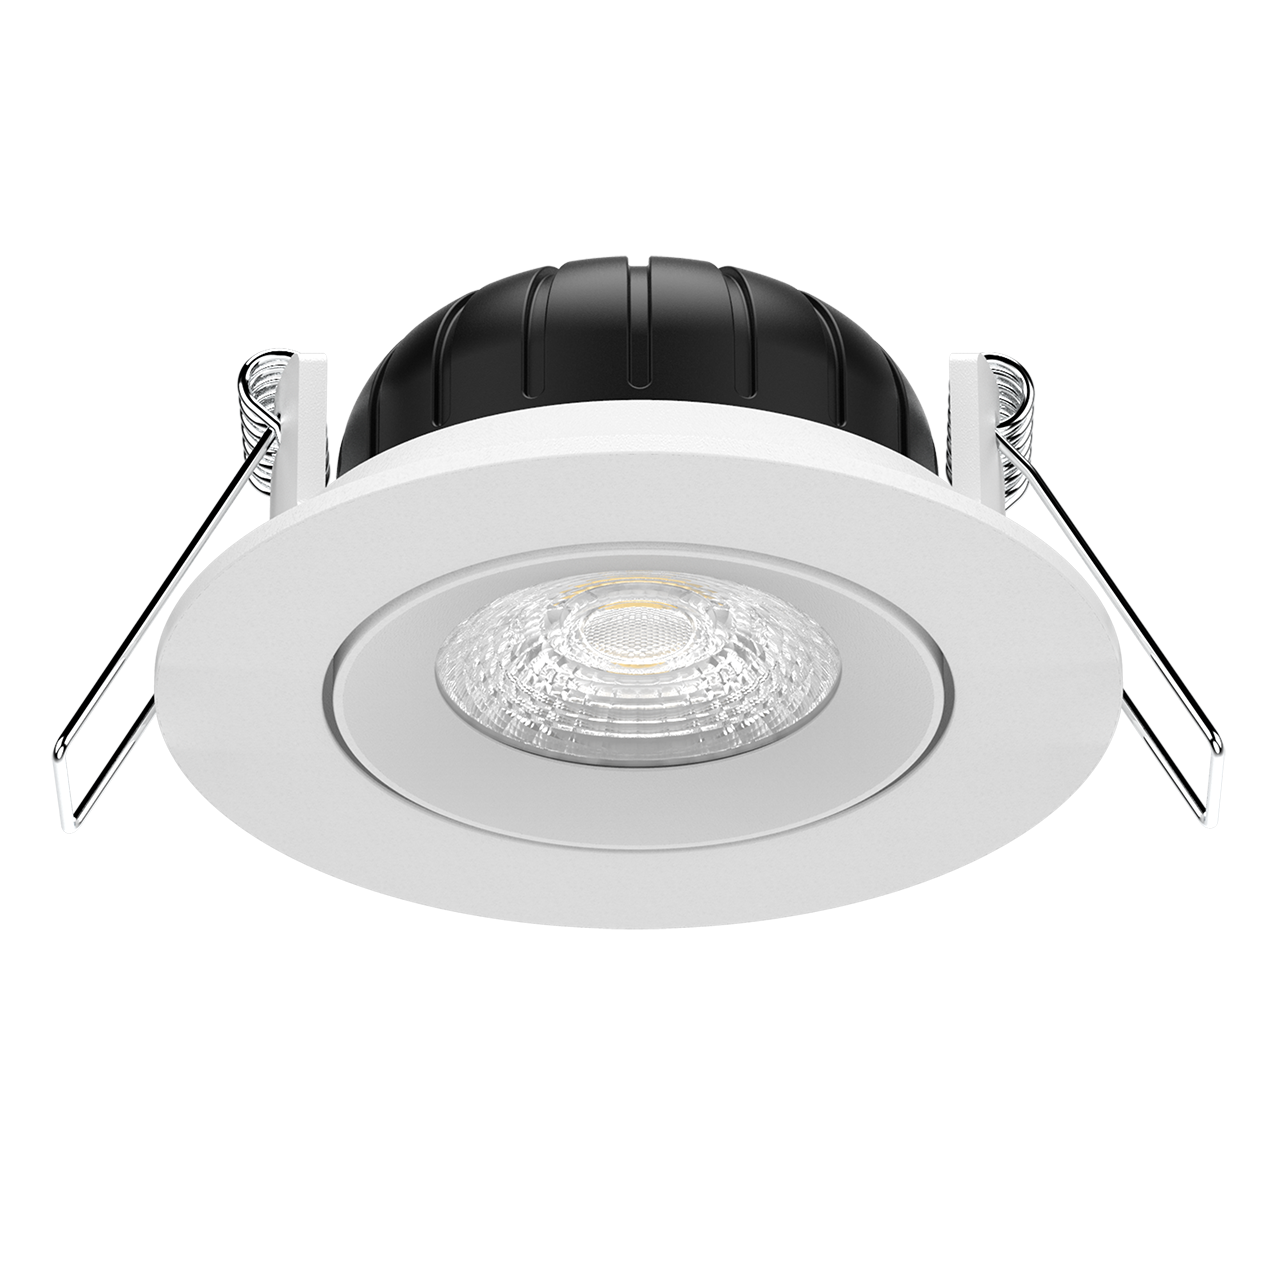 PriceList for Led Cob Downlights - New CRI 95 Dim to warm changeable 7W LED Downlight – Radiant Lighting